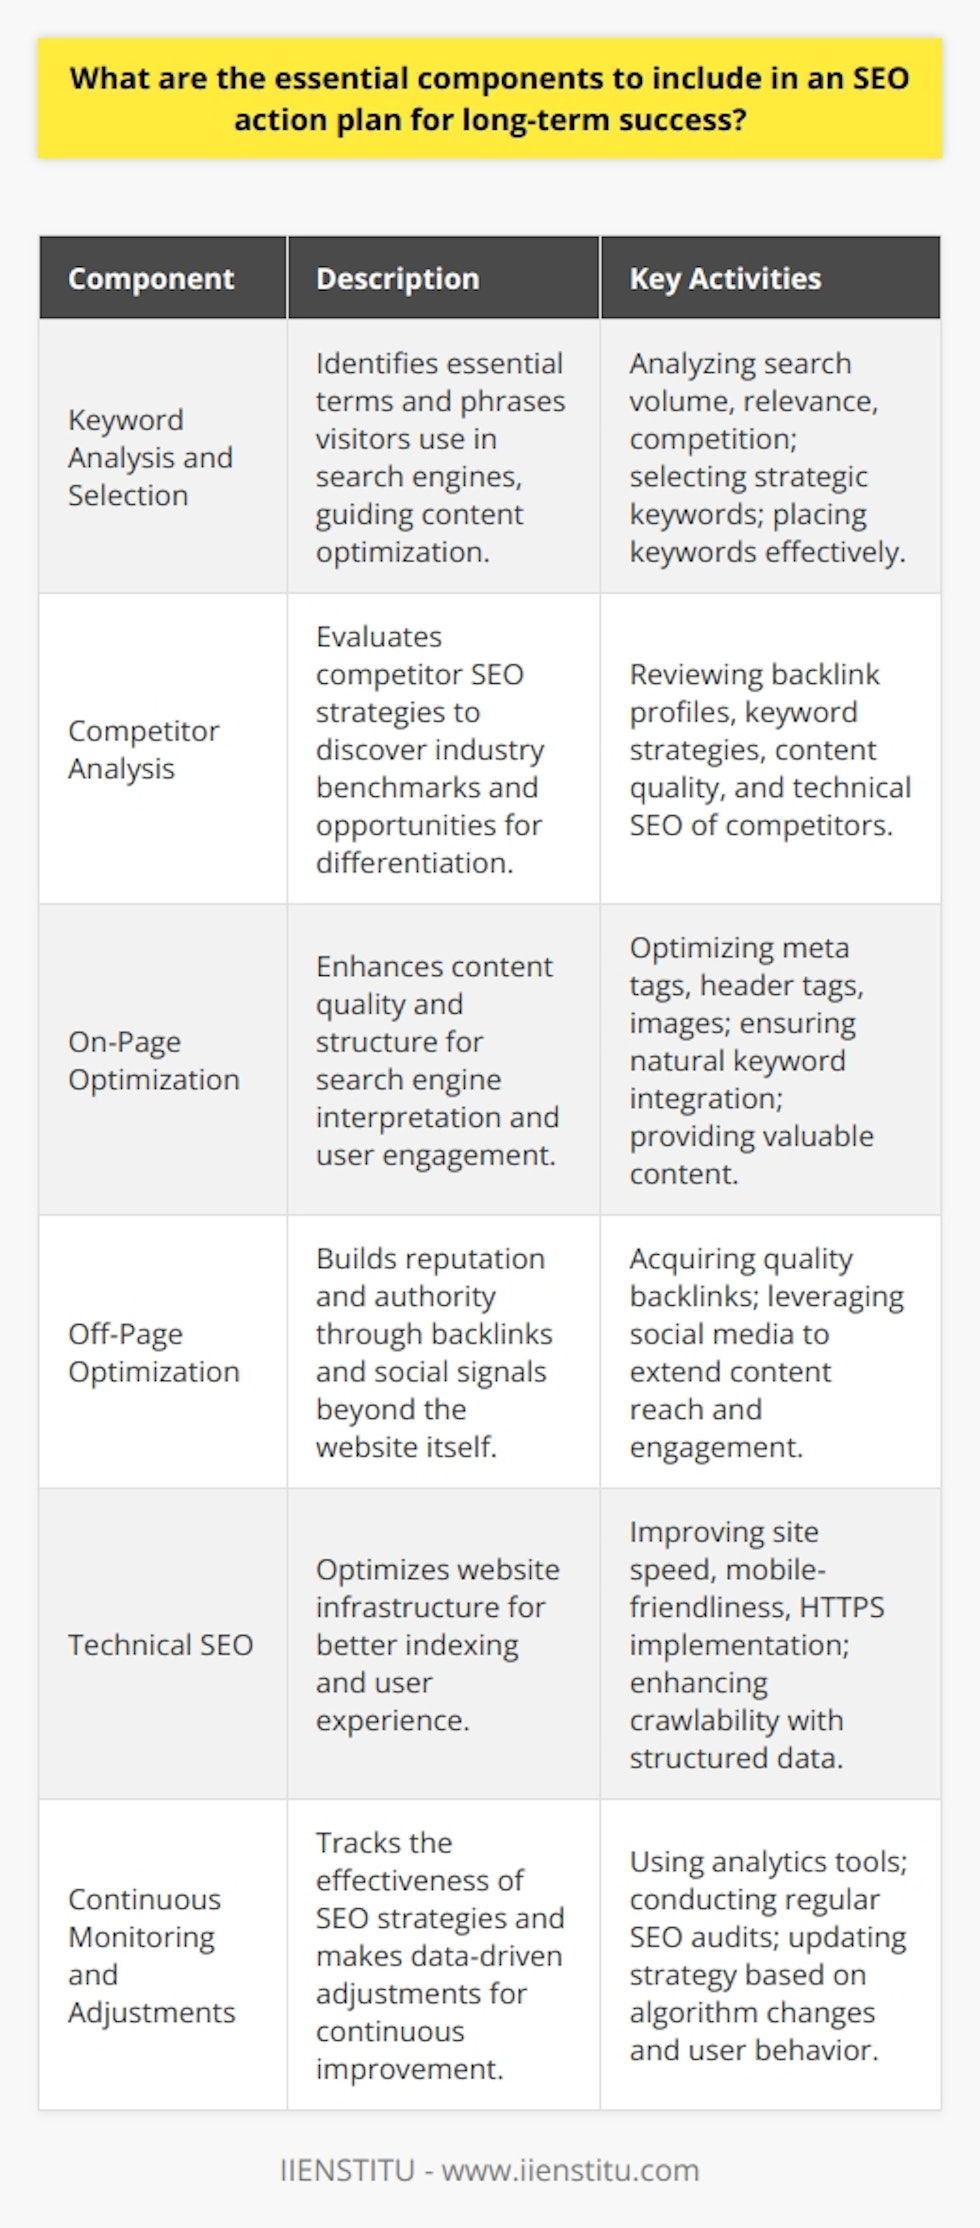 A successful SEO action plan is a well-rounded strategy that addresses various aspects of website optimization to improve search engine rankings and visibility over the long term. Here's a breakdown of the essential components that should be included in an SEO action plan for sustained success:1. **Keyword Analysis and Selection**: A foundational element of SEO, keyword analysis identifies the terms and phrases that potential visitors are entering into search engines. These keywords guide content creation and optimization, enabling a website to rank for relevant search queries. Selection of the right keywords hinges on factors such as search volume, relevance, competition, and user intent. Tools and techniques are used to uncover these valuable keywords, which are then strategically placed where they matter most.2. **Competitor Analysis**: Understanding the competition is pivotal to carving out a competitive edge in search engine rankings. By examining the SEO strategies of competitors, businesses can identify what's working within their industry, find gaps in their own strategy, and unveil new opportunities for growth. Competitor analysis involves reviewing their backlink profile, keyword usage, content strategy, and technical SEO practices.3. **On-Page Optimization**: Effective on-page optimization ensures that the content on a website is not only rich in quality and relevancy but also structured in a way that search engines can easily interpret. It involves fine-tuning elements such as meta titles and descriptions for better click-through rates, using header tags for structure, optimizing images, and ensuring keyword integration is natural and contextually appropriate. Furthermore, content should provide genuine value, answering questions, and providing solutions to user queries.4. **Off-Page Optimization**: Beyond the website, off-page SEO focuses on building the site's reputation and authority through backlinks and social signals. Authoritative backlinks from trusted sources signal to search engines that the content is valuable, which can significantly impact rankings. Similarly, social media activity can amplify content reach and engagement, although its direct impact on SEO rankings is often a topic of debate.5. **Technical SEO**: This behind-the-scenes aspect of SEO involves optimizing a website's infrastructure. Site speed, mobile-friendliness, secure connections (HTTPS), structured data, and crawlability are all factors that search engines take into account when ranking websites. Robust technical SEO ensures that a site is easily navigable not only for users but for search engine robots as well.6. **Continuous Monitoring and Adjustments**: SEO is not a set-it-and-forget-it endeavor. Constant monitoring through tools that track rankings, traffic, and engagement is essential to understanding the effectiveness of an SEO strategy. Adjustments should be made in response to these insights, as well as algorithm updates and changes in user behavior. SEO requires adaptability, and regular audits and updates are crucial for staying ahead.By prioritizing these essential components—keyword analysis, competitor analysis, on-page optimization, off-page optimization, technical SEO, and continuous monitoring—businesses can craft a comprehensive SEO strategy poised for long-term success.When referring to additional learning or professional development, an institute like IIENSTITU offers resources to heighten knowledge in this ever-evolving field, helping individuals stay informed about best practices and emerging trends in SEO.